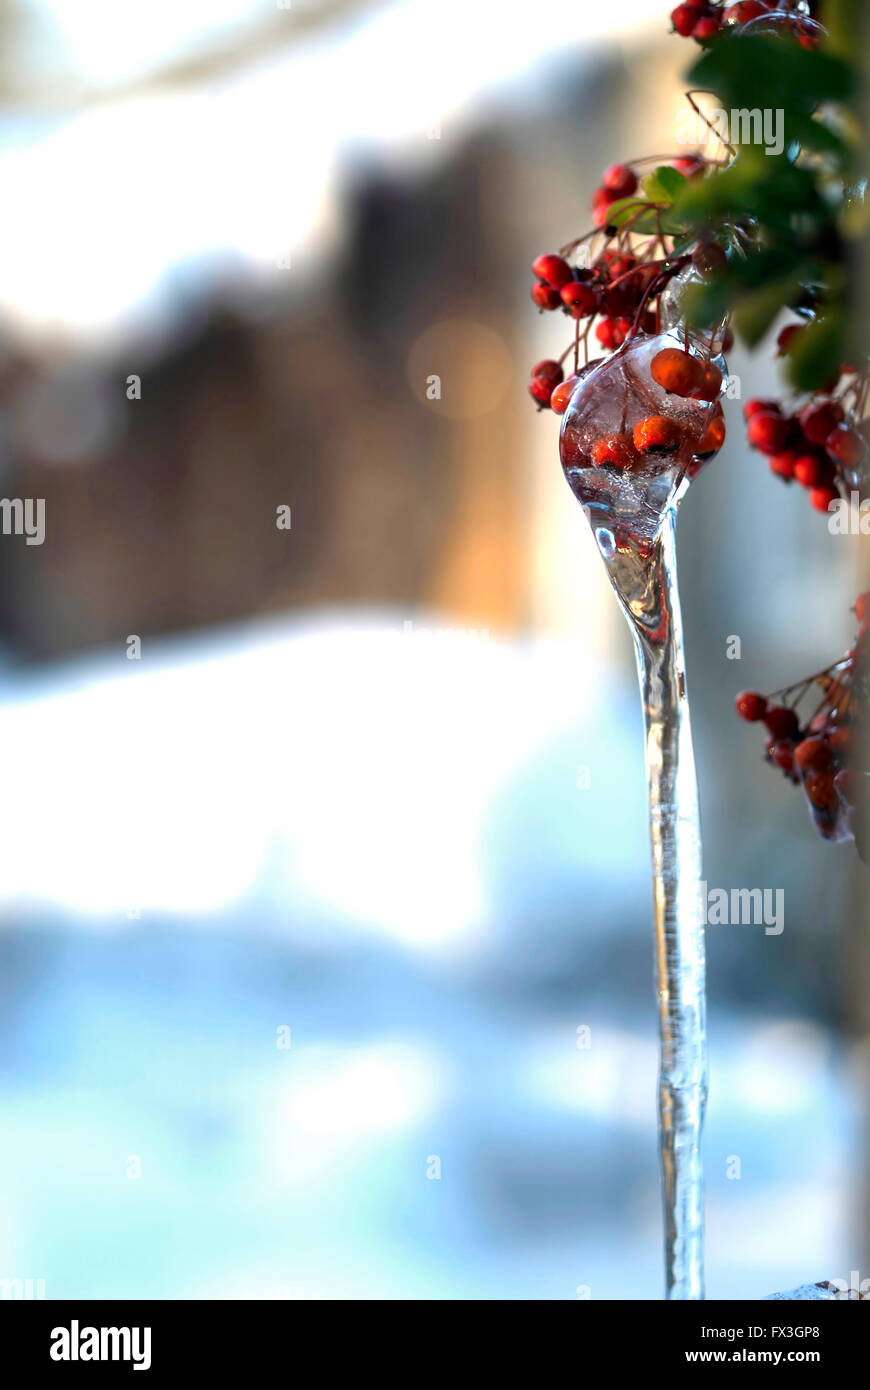 Icicle on berries / Winter Stock Photo